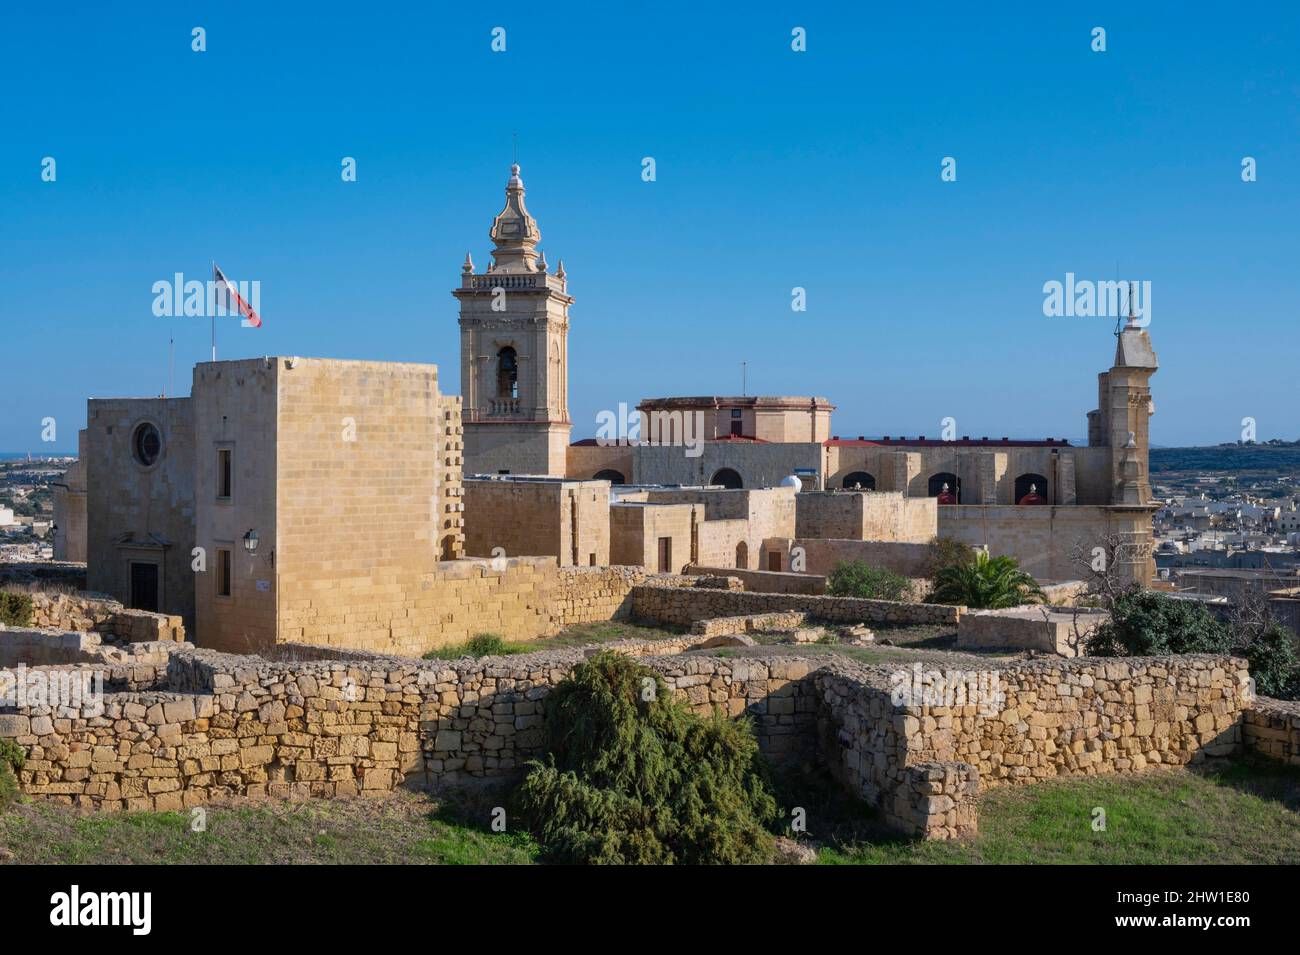 Malta, Gozo island, Victoria (Rabat), Notre-Dame-de-l'Assomption cathedral view from the ramparts of the citadel Stock Photo